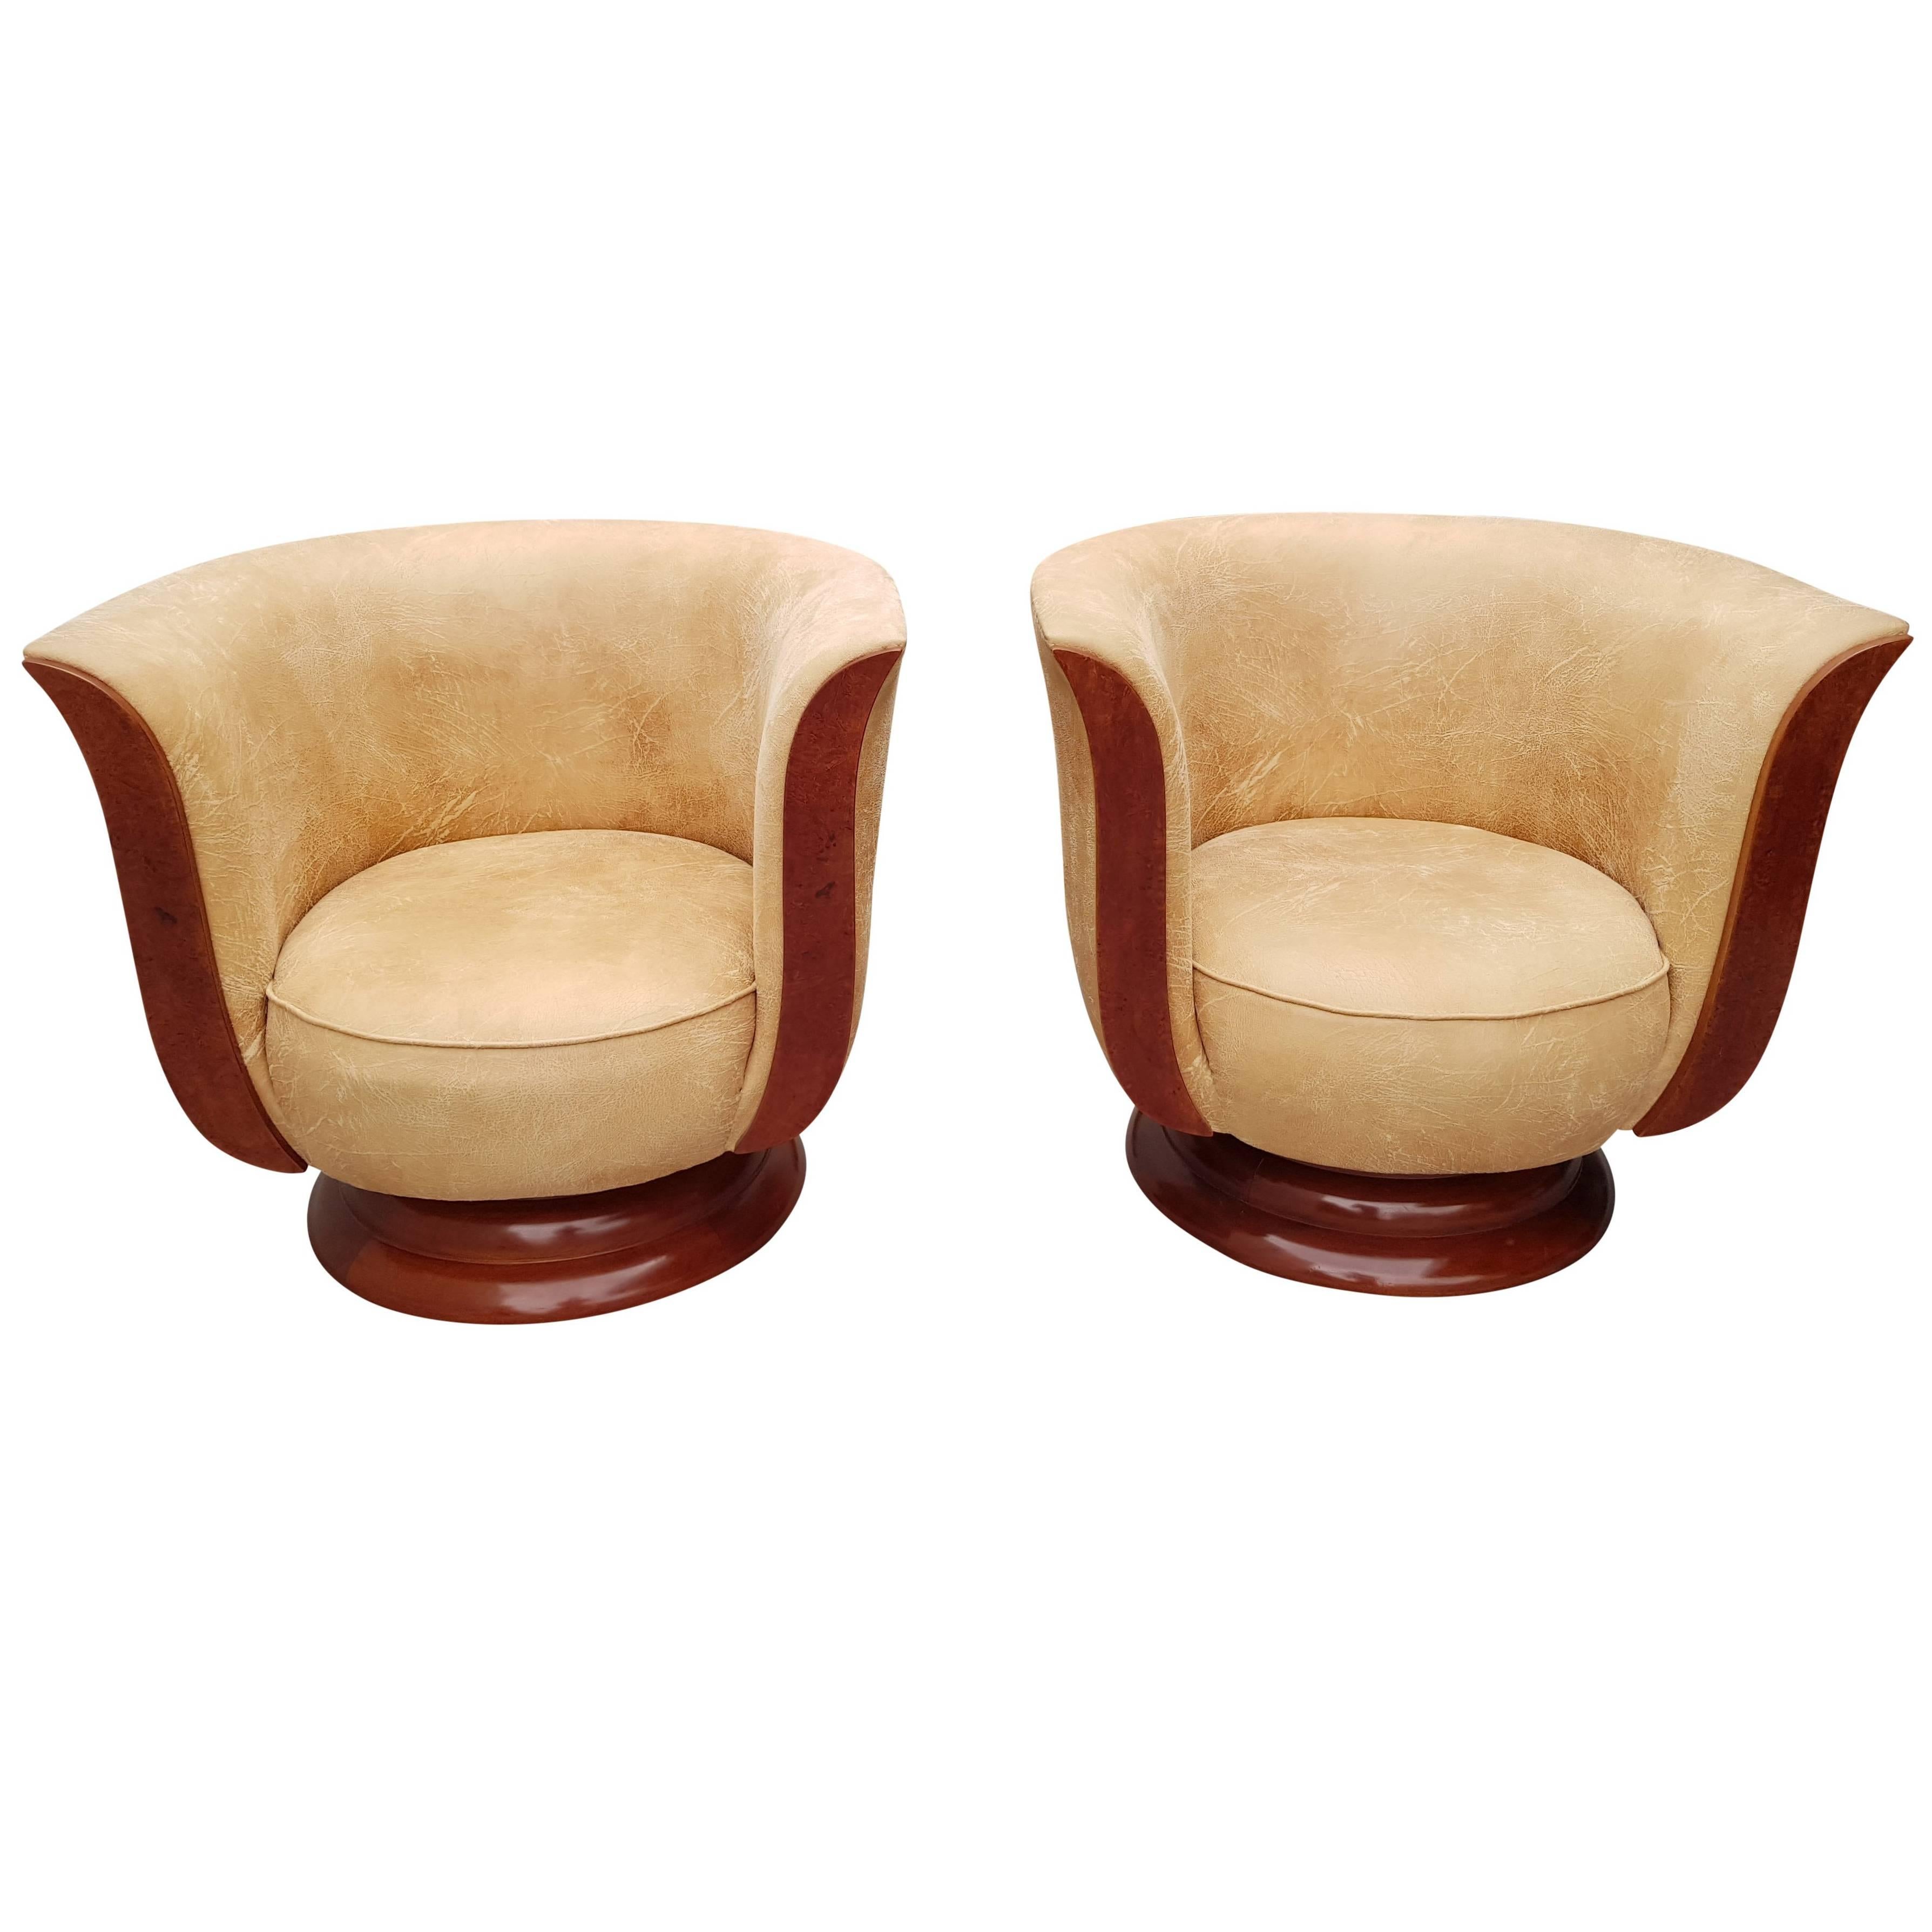 Art Deco Pair of Lounge Chairs for Hotel "Le Malandre"